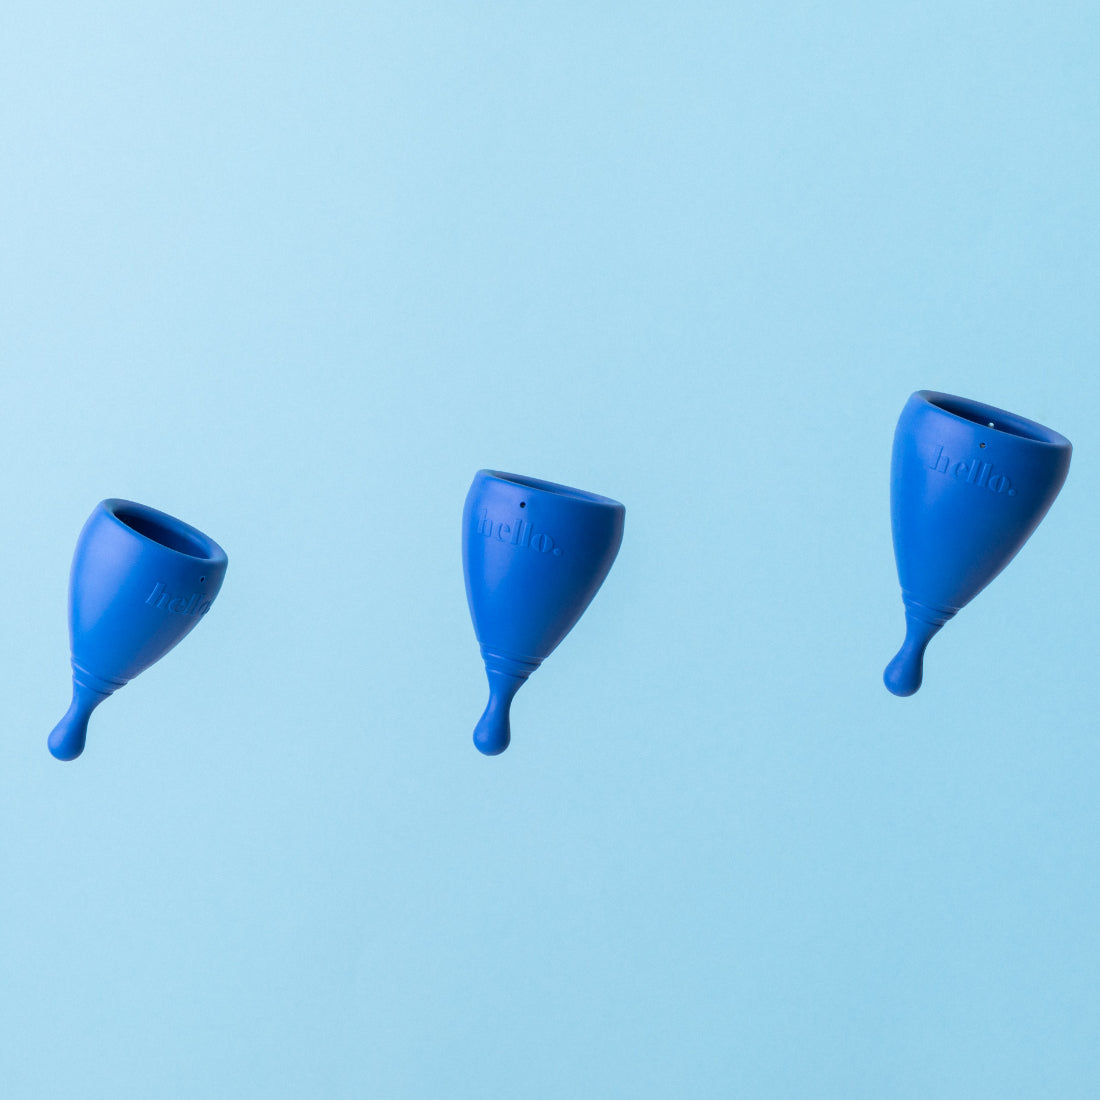 NEW HELLO CUP | Meet the Hello High Cervix Menstrual Cup 💙